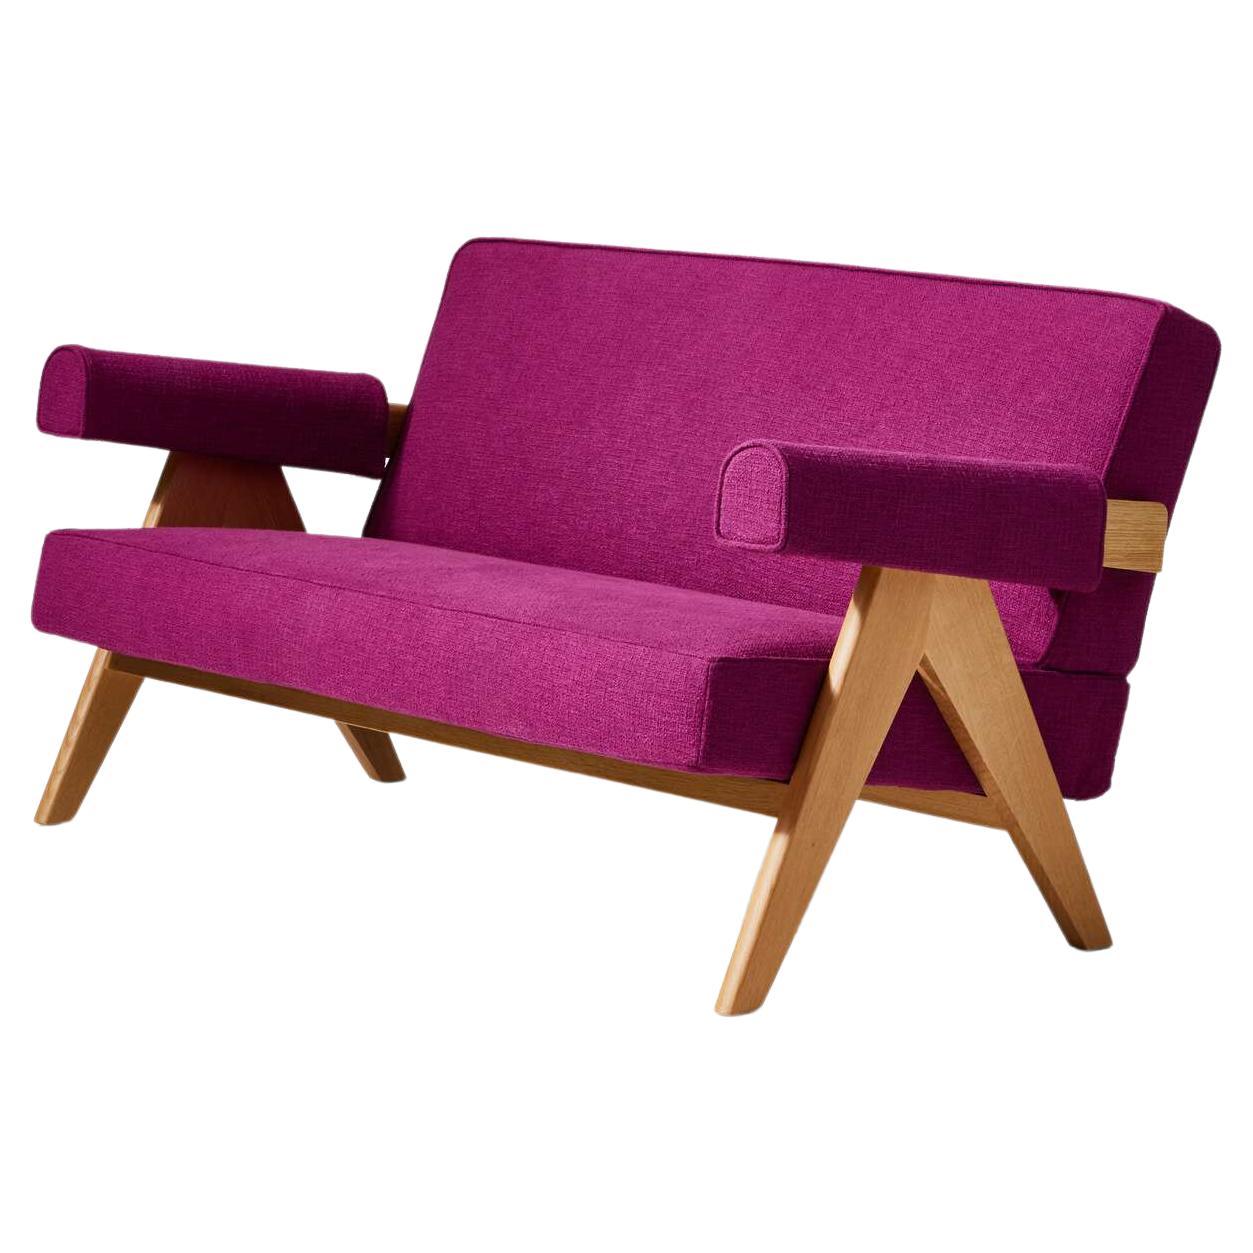 Pierre Jeanneret Capitol Complex Sofa Settee in Purple for Cassina, Italy - New  For Sale